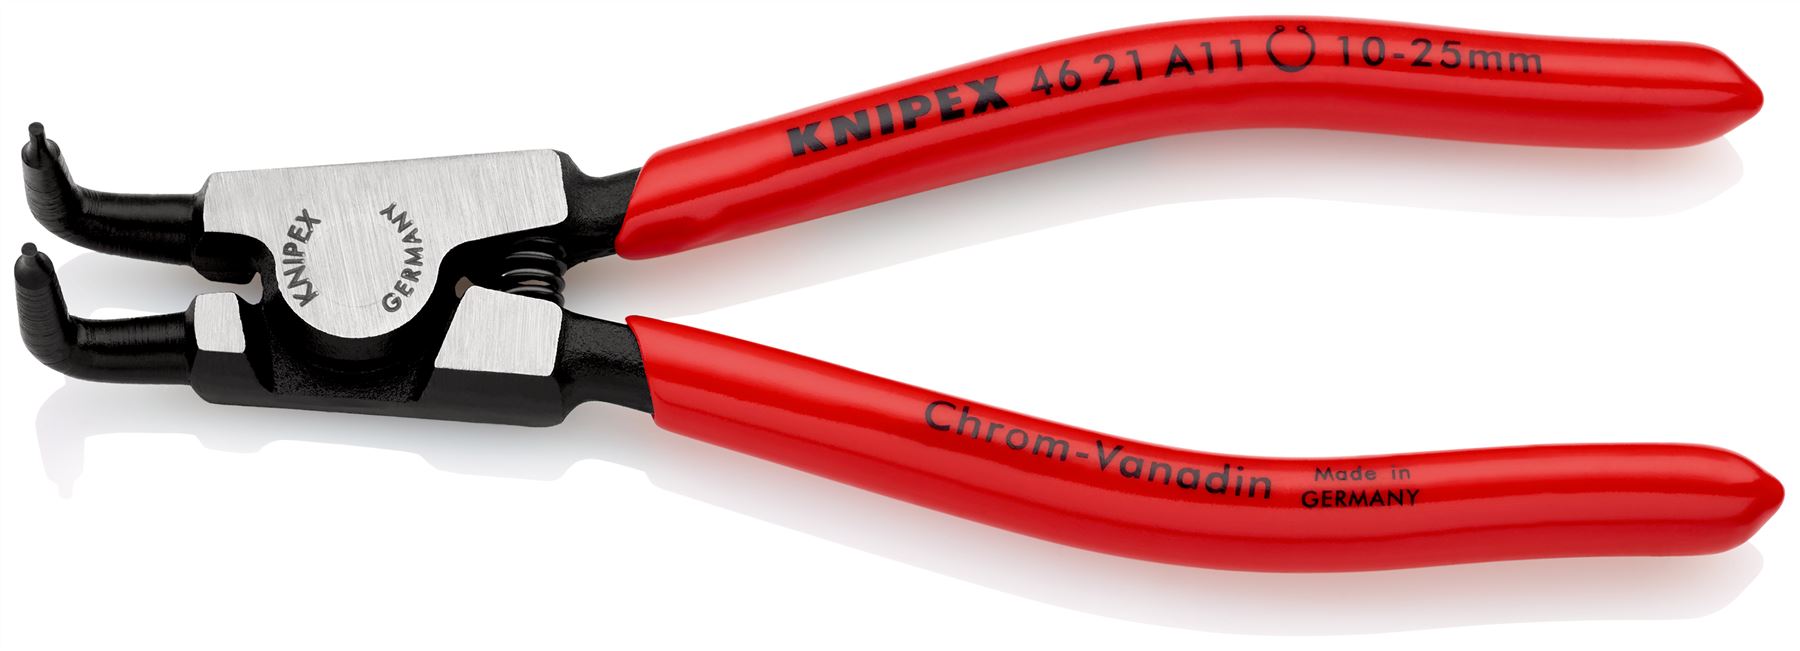 KNIPEX Circlip Pliers for External Circlips on Shafts 90° Angled 125mm 1.3mm Diameter Tips 46 21 A11